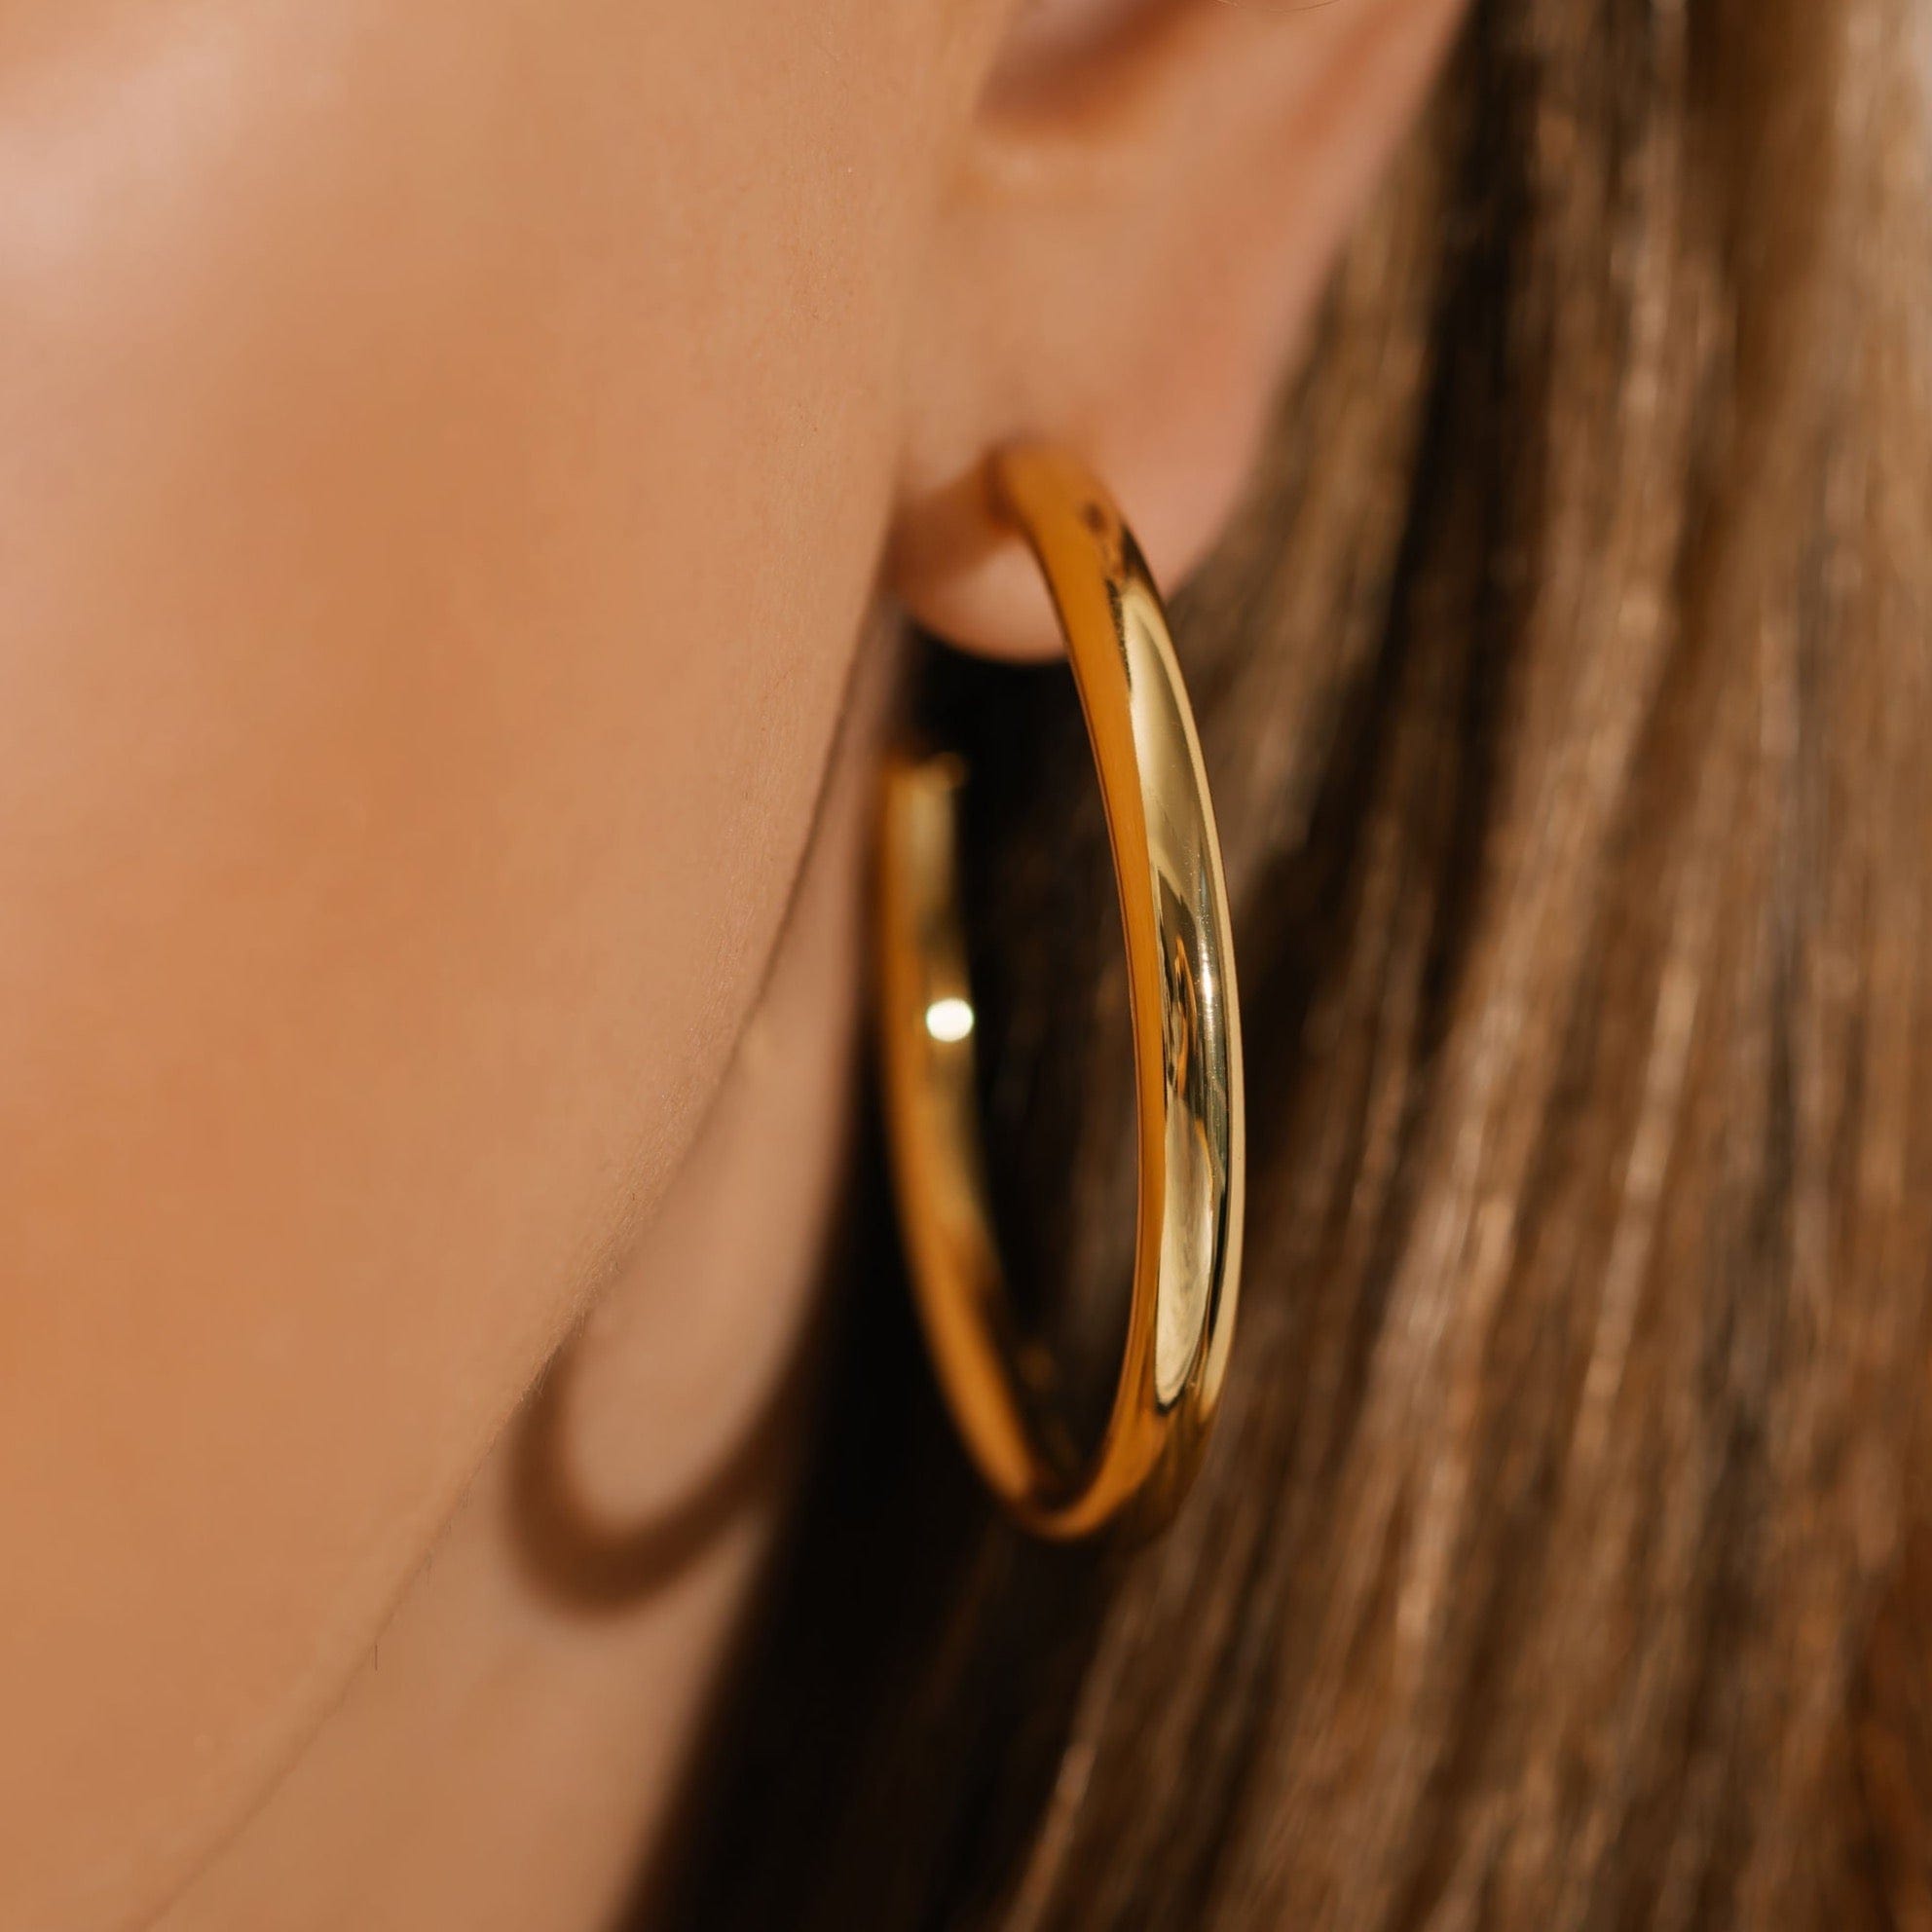 A close-up view shows the smooth and reflective golden surface of the large 45mm Malta Hoop earring as it's worn on the model's ear. 